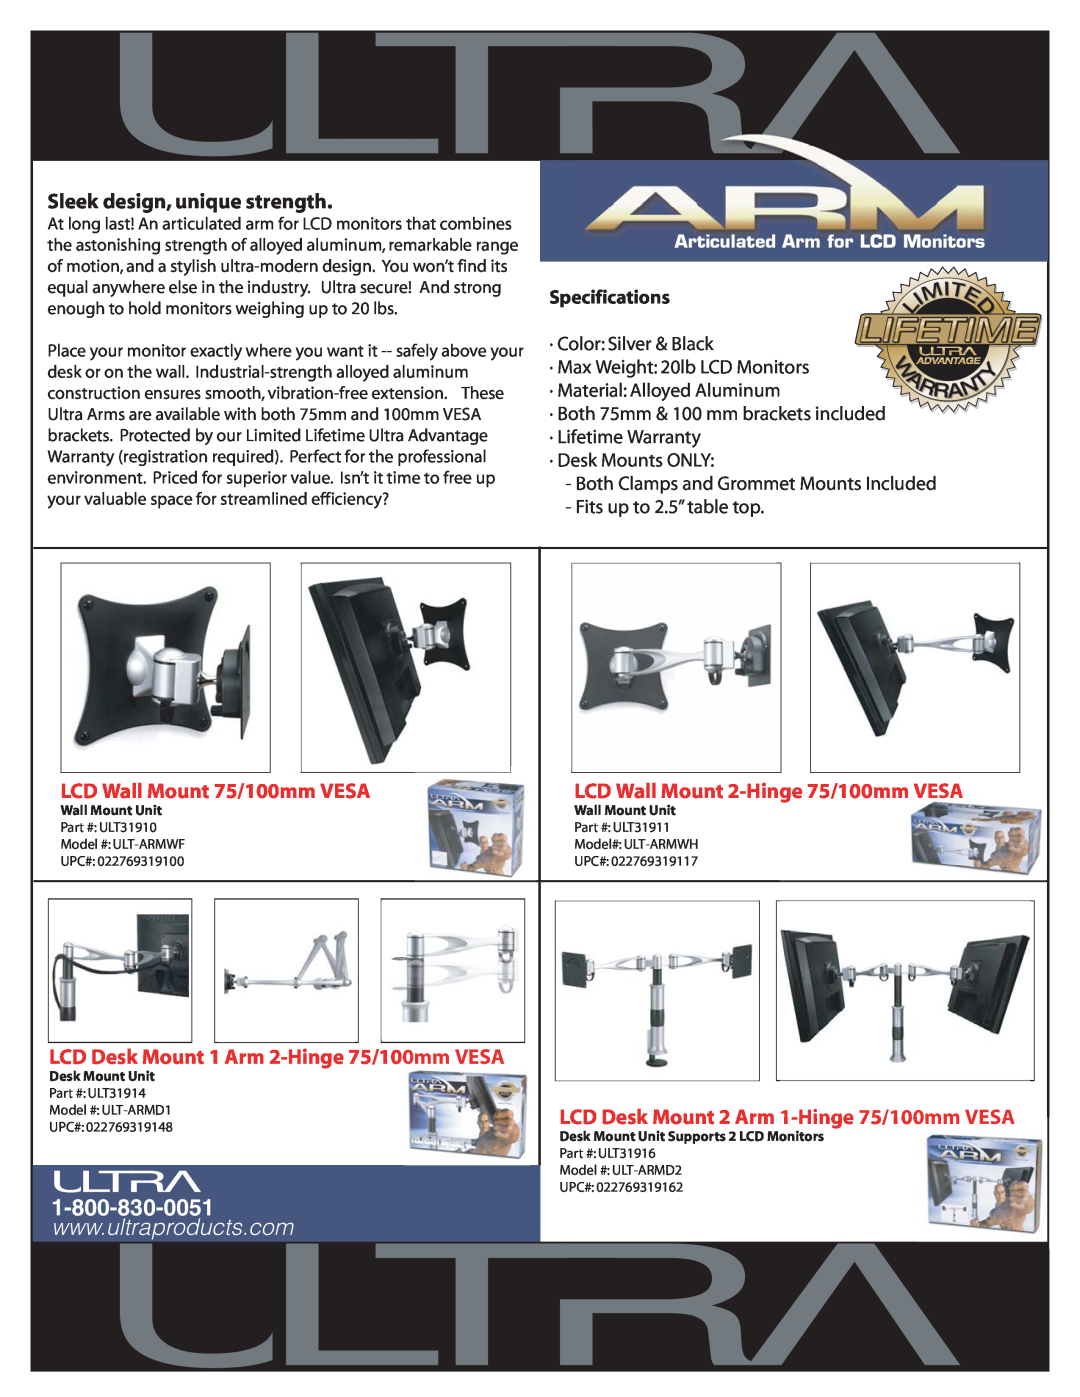 Ultra Products ULT-ARMD2 specifications Sleek design, unique strength, LCD Wall Mount 75/100mm VESA, Specifications 